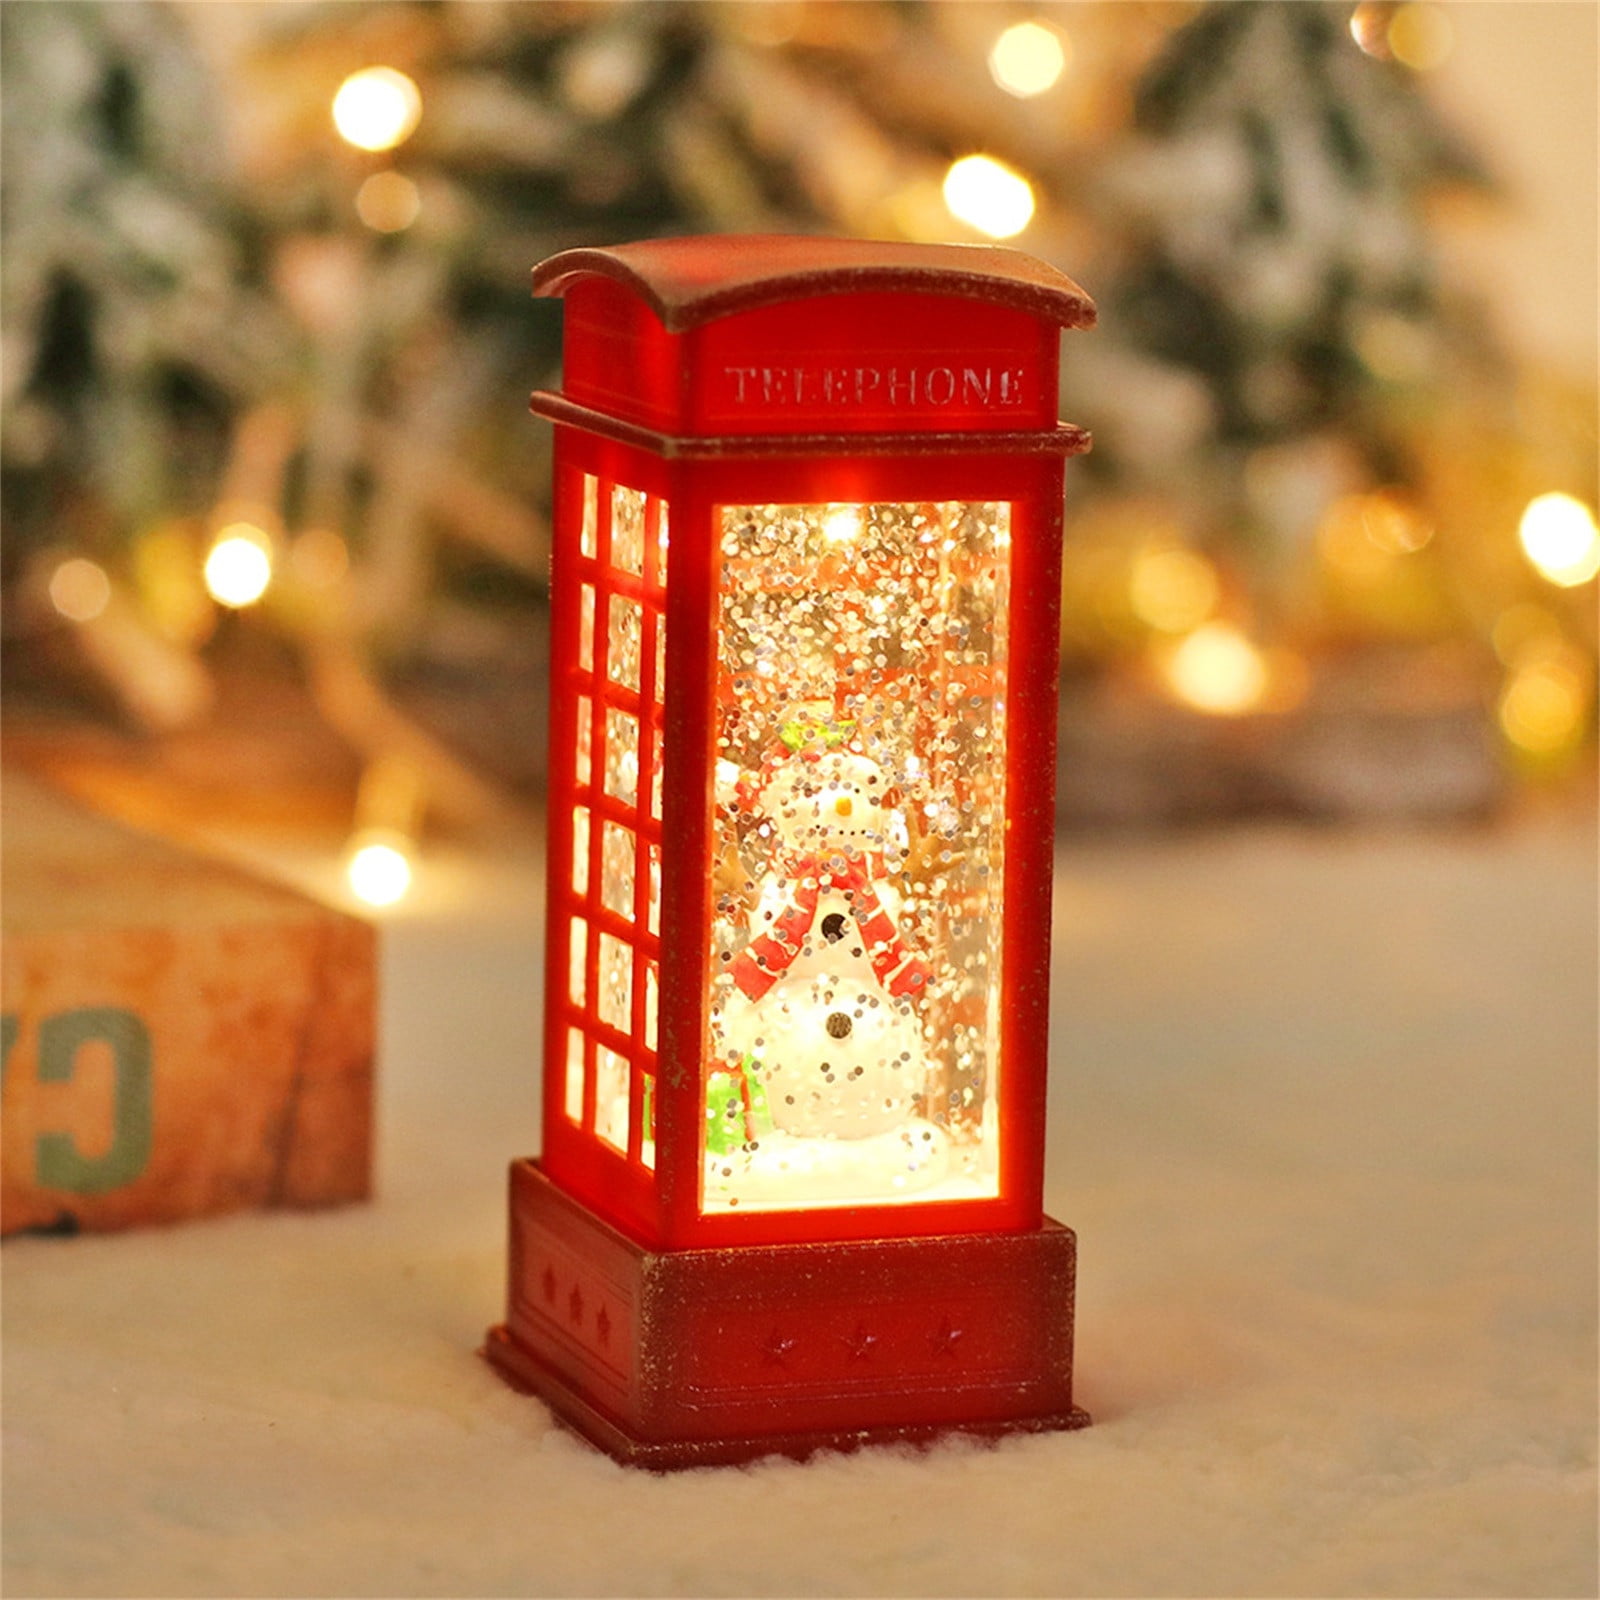 Heiheiup Christmas Decoration Led Christmas Telephone Booth Led Wind Lamp  Decoration Home Props Red Light Phone Booth 10ml Easter Arts And Crafts for  Kids 4-6 